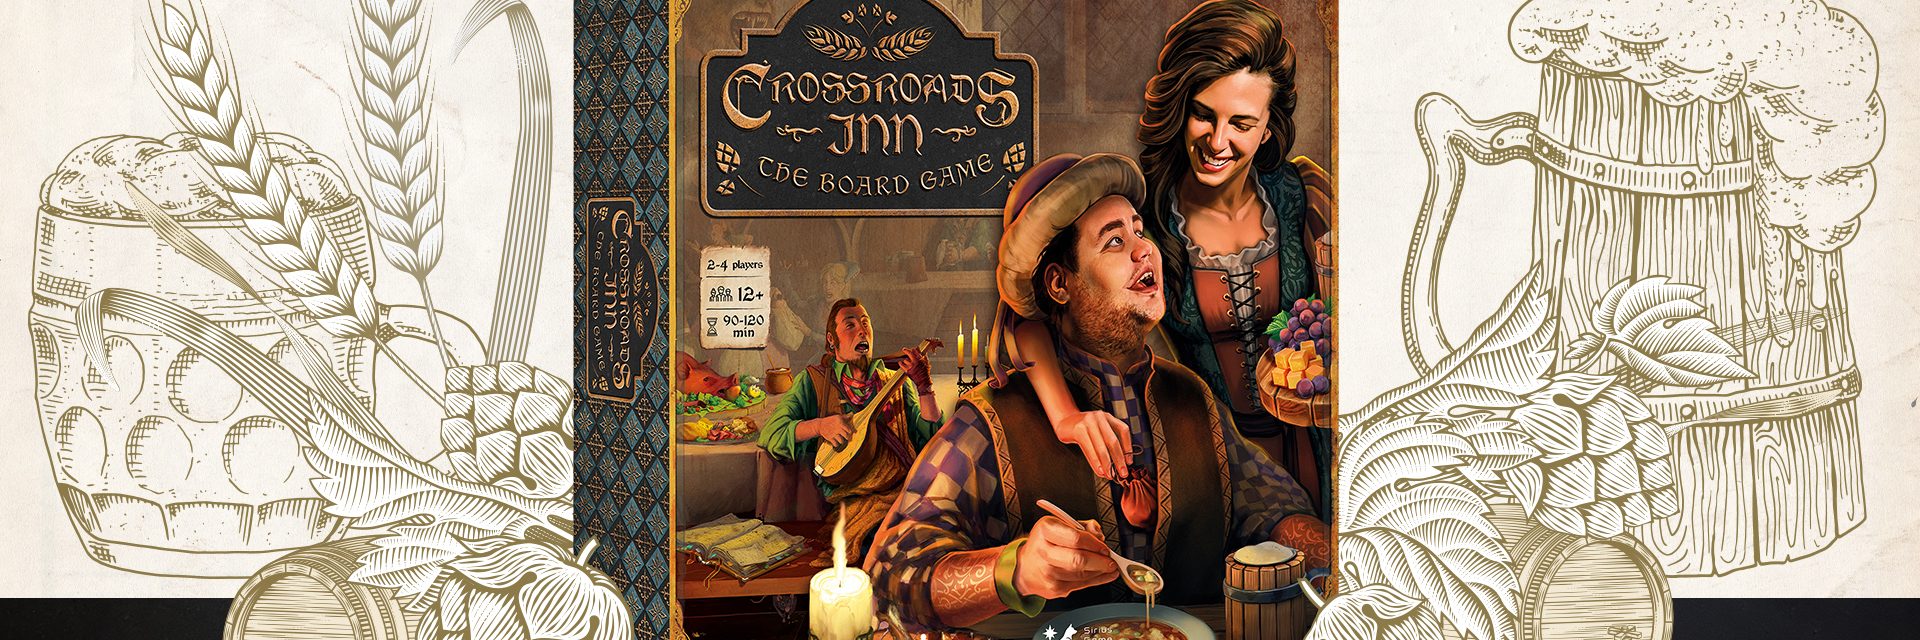 KLABATER LAUNCHED A CROWDFUNDING CAMPAIGN FOR CROSSROADS INN: THE BOARD GAME!